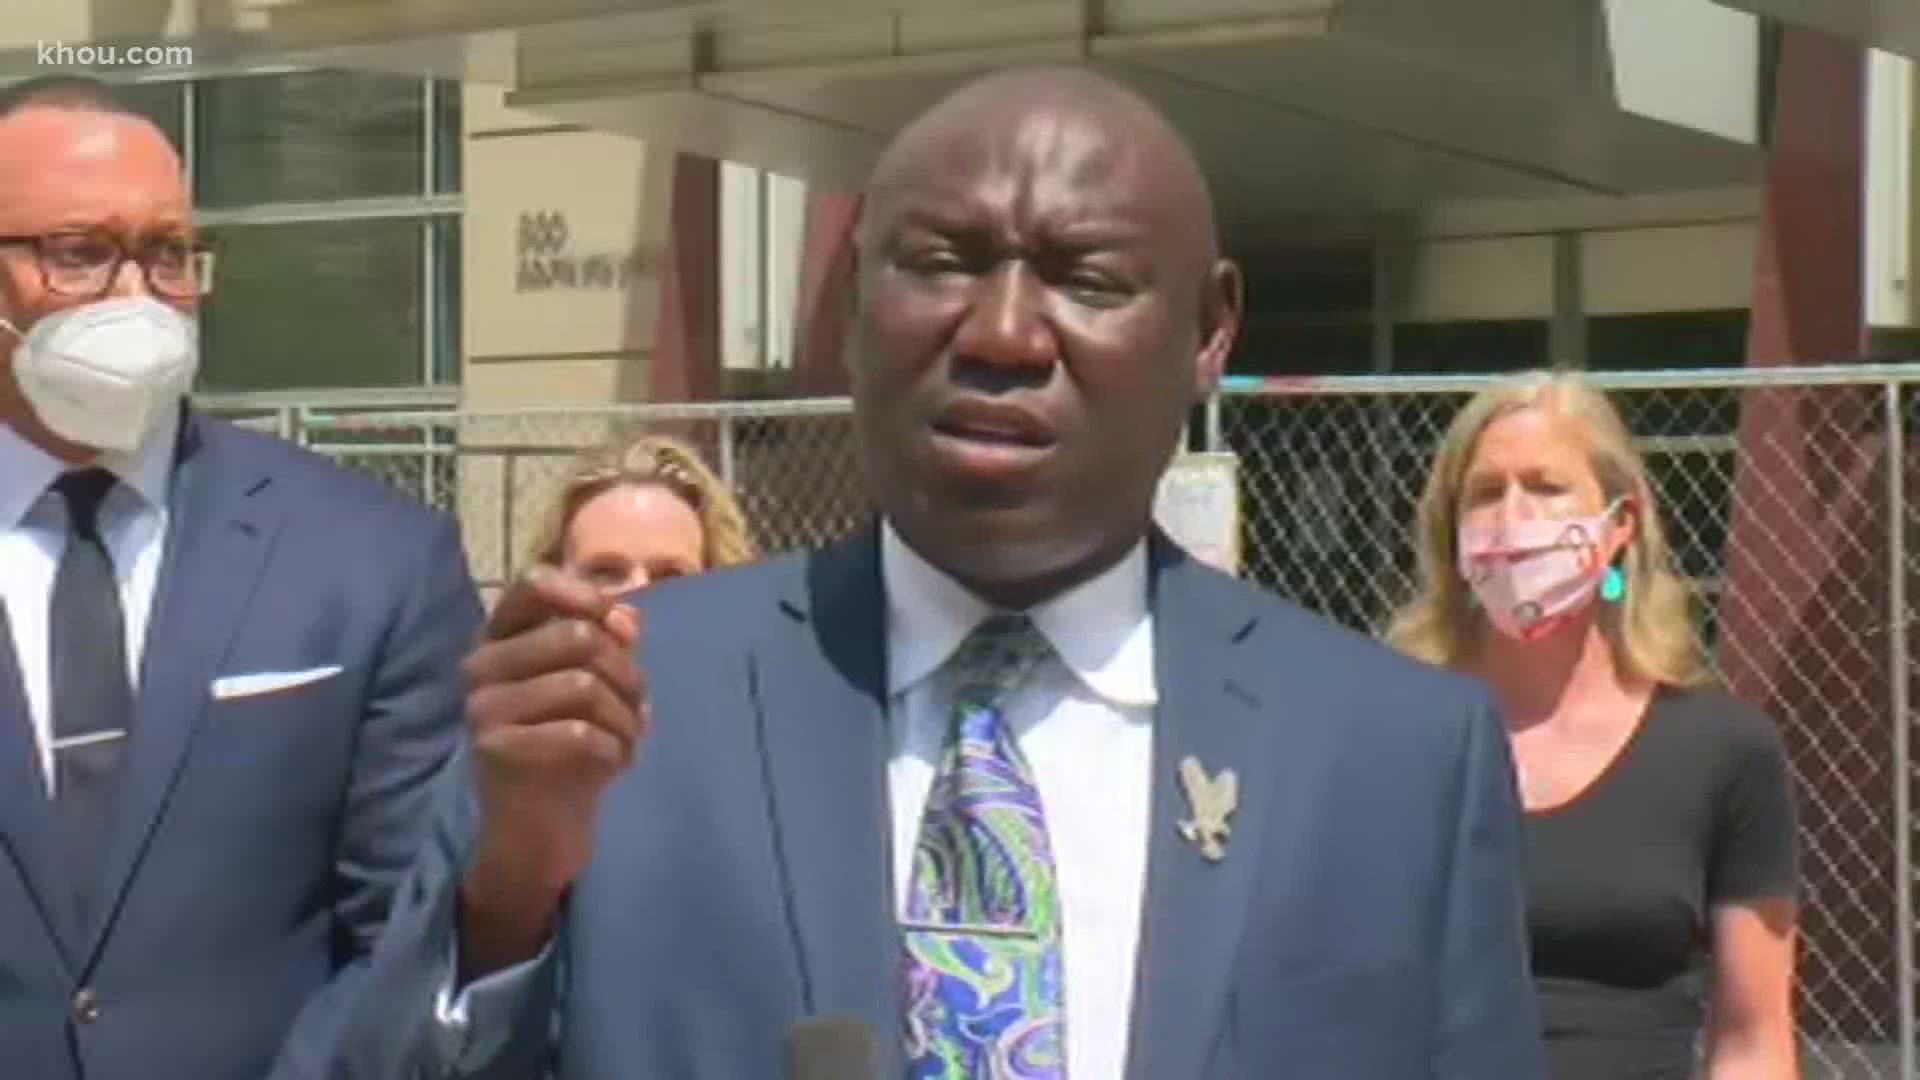 Ben Crump and co-counsel Antonio Romanucci made the announcement Wednesday on behalf of Floyd's family.